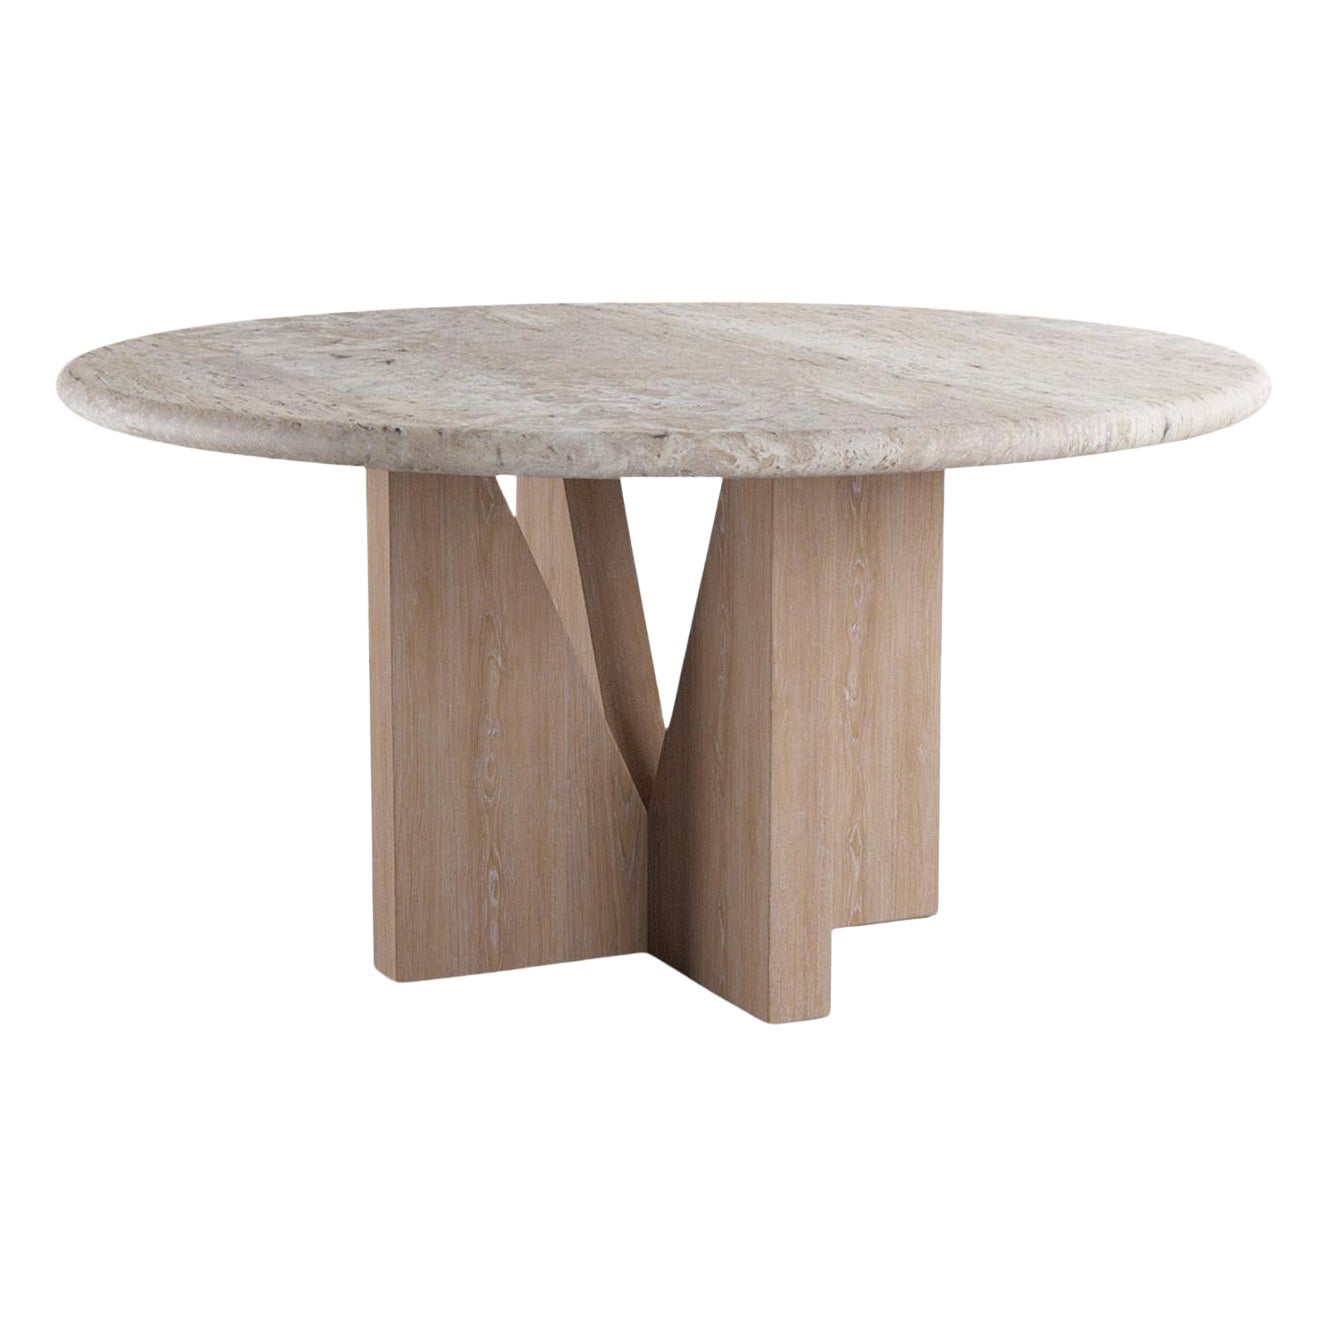 "Elysées" Travertine and Cerused French Oak Dining Table by Christiane Lemieux For Sale